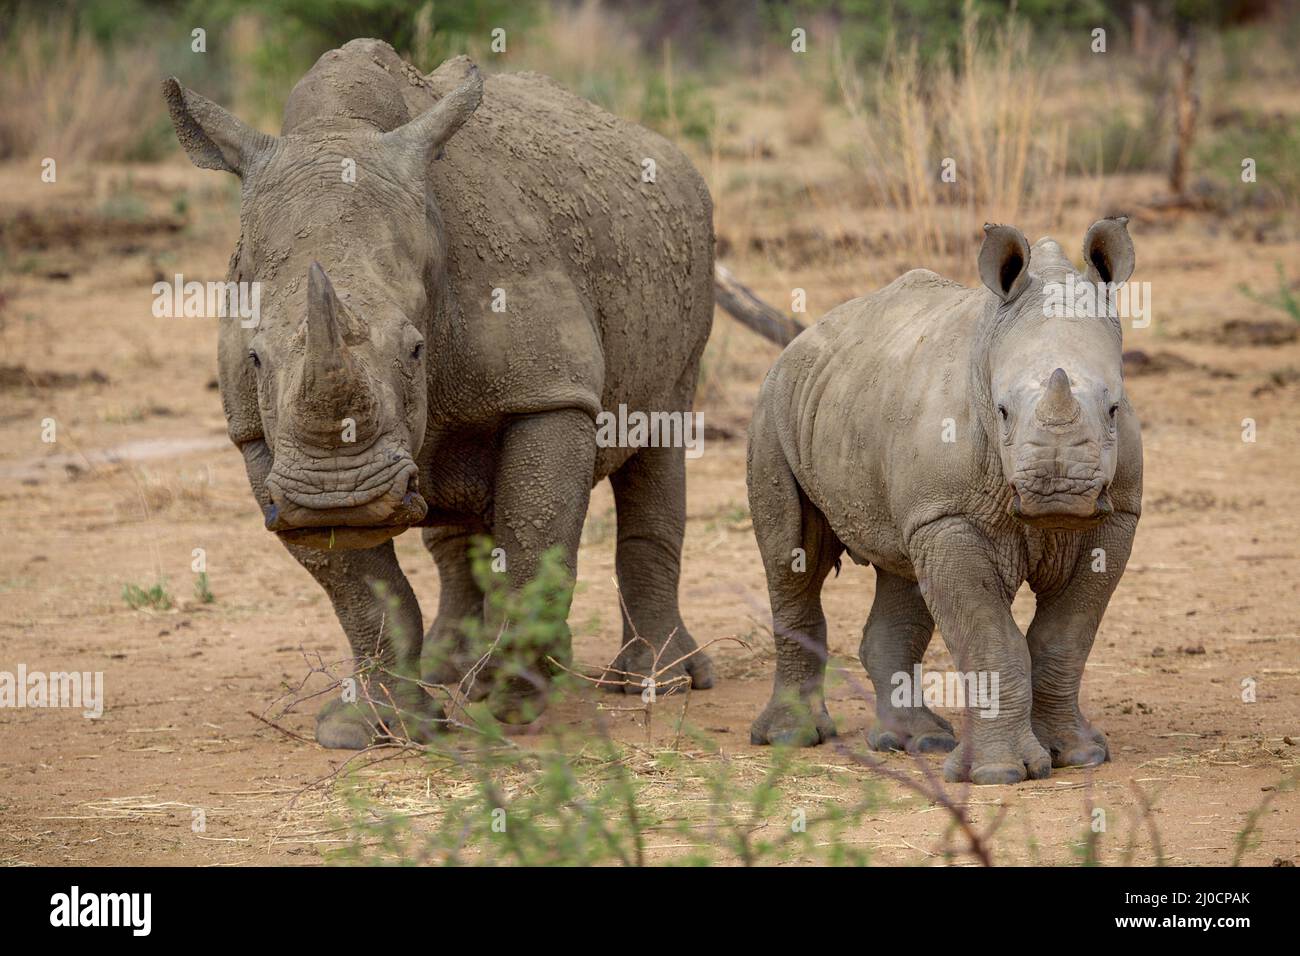 A baby rhino and his mother in the Kruger National Park South Africa Stock Photo